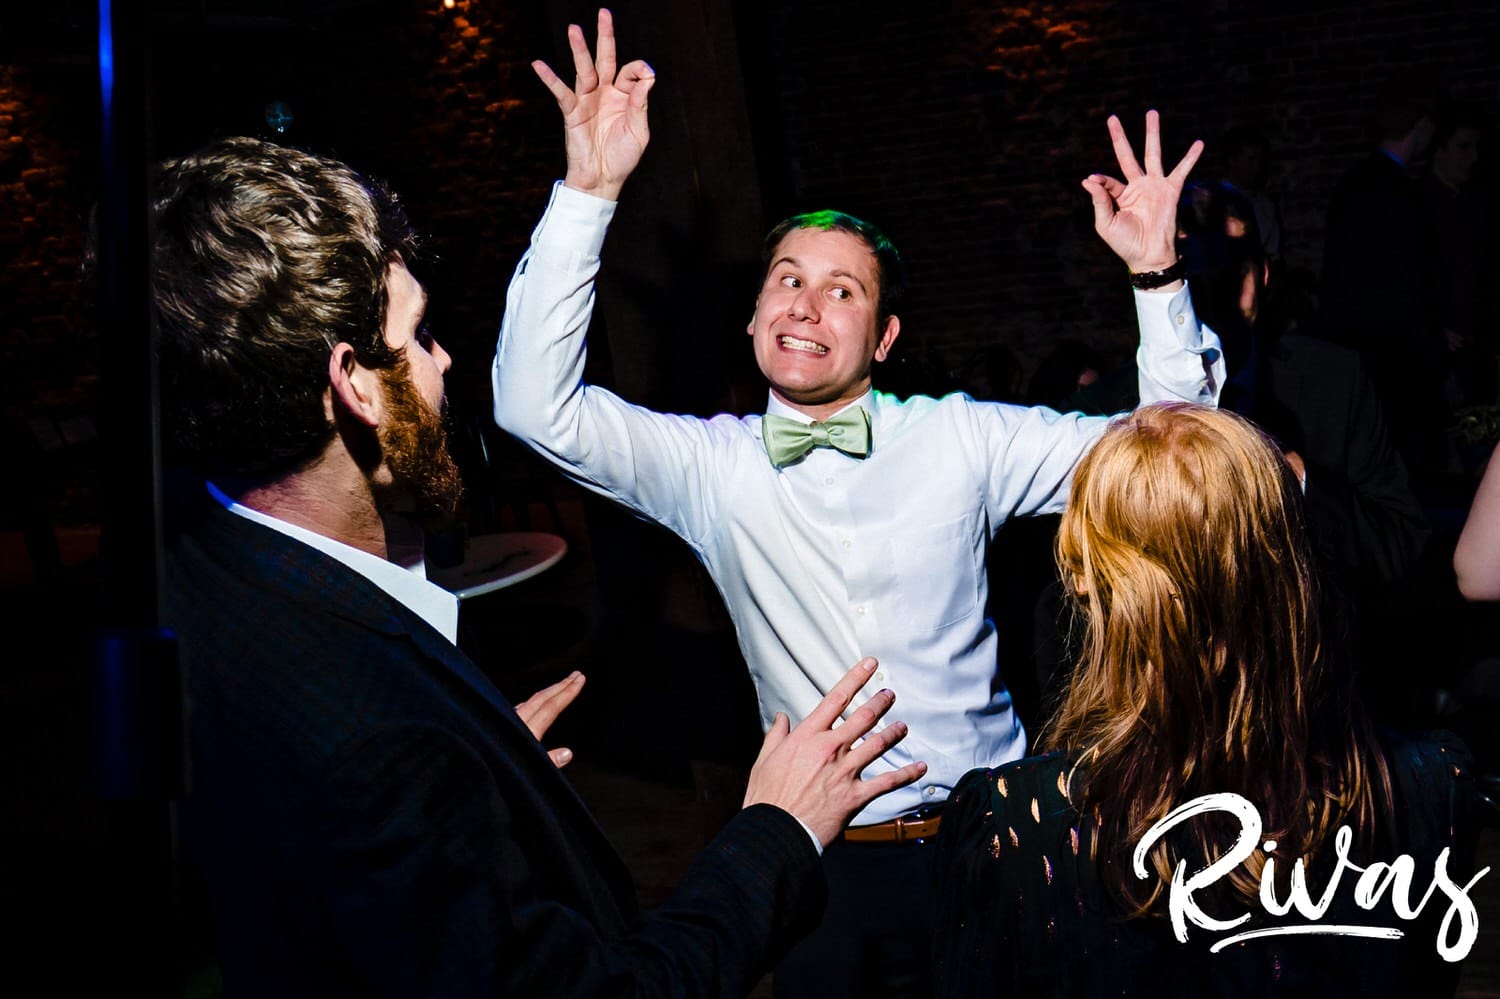 A colorful, candid picture of a bride and groom dancing together with their guests during their wedding reception at The Foundation Event Space in Kansas City. 